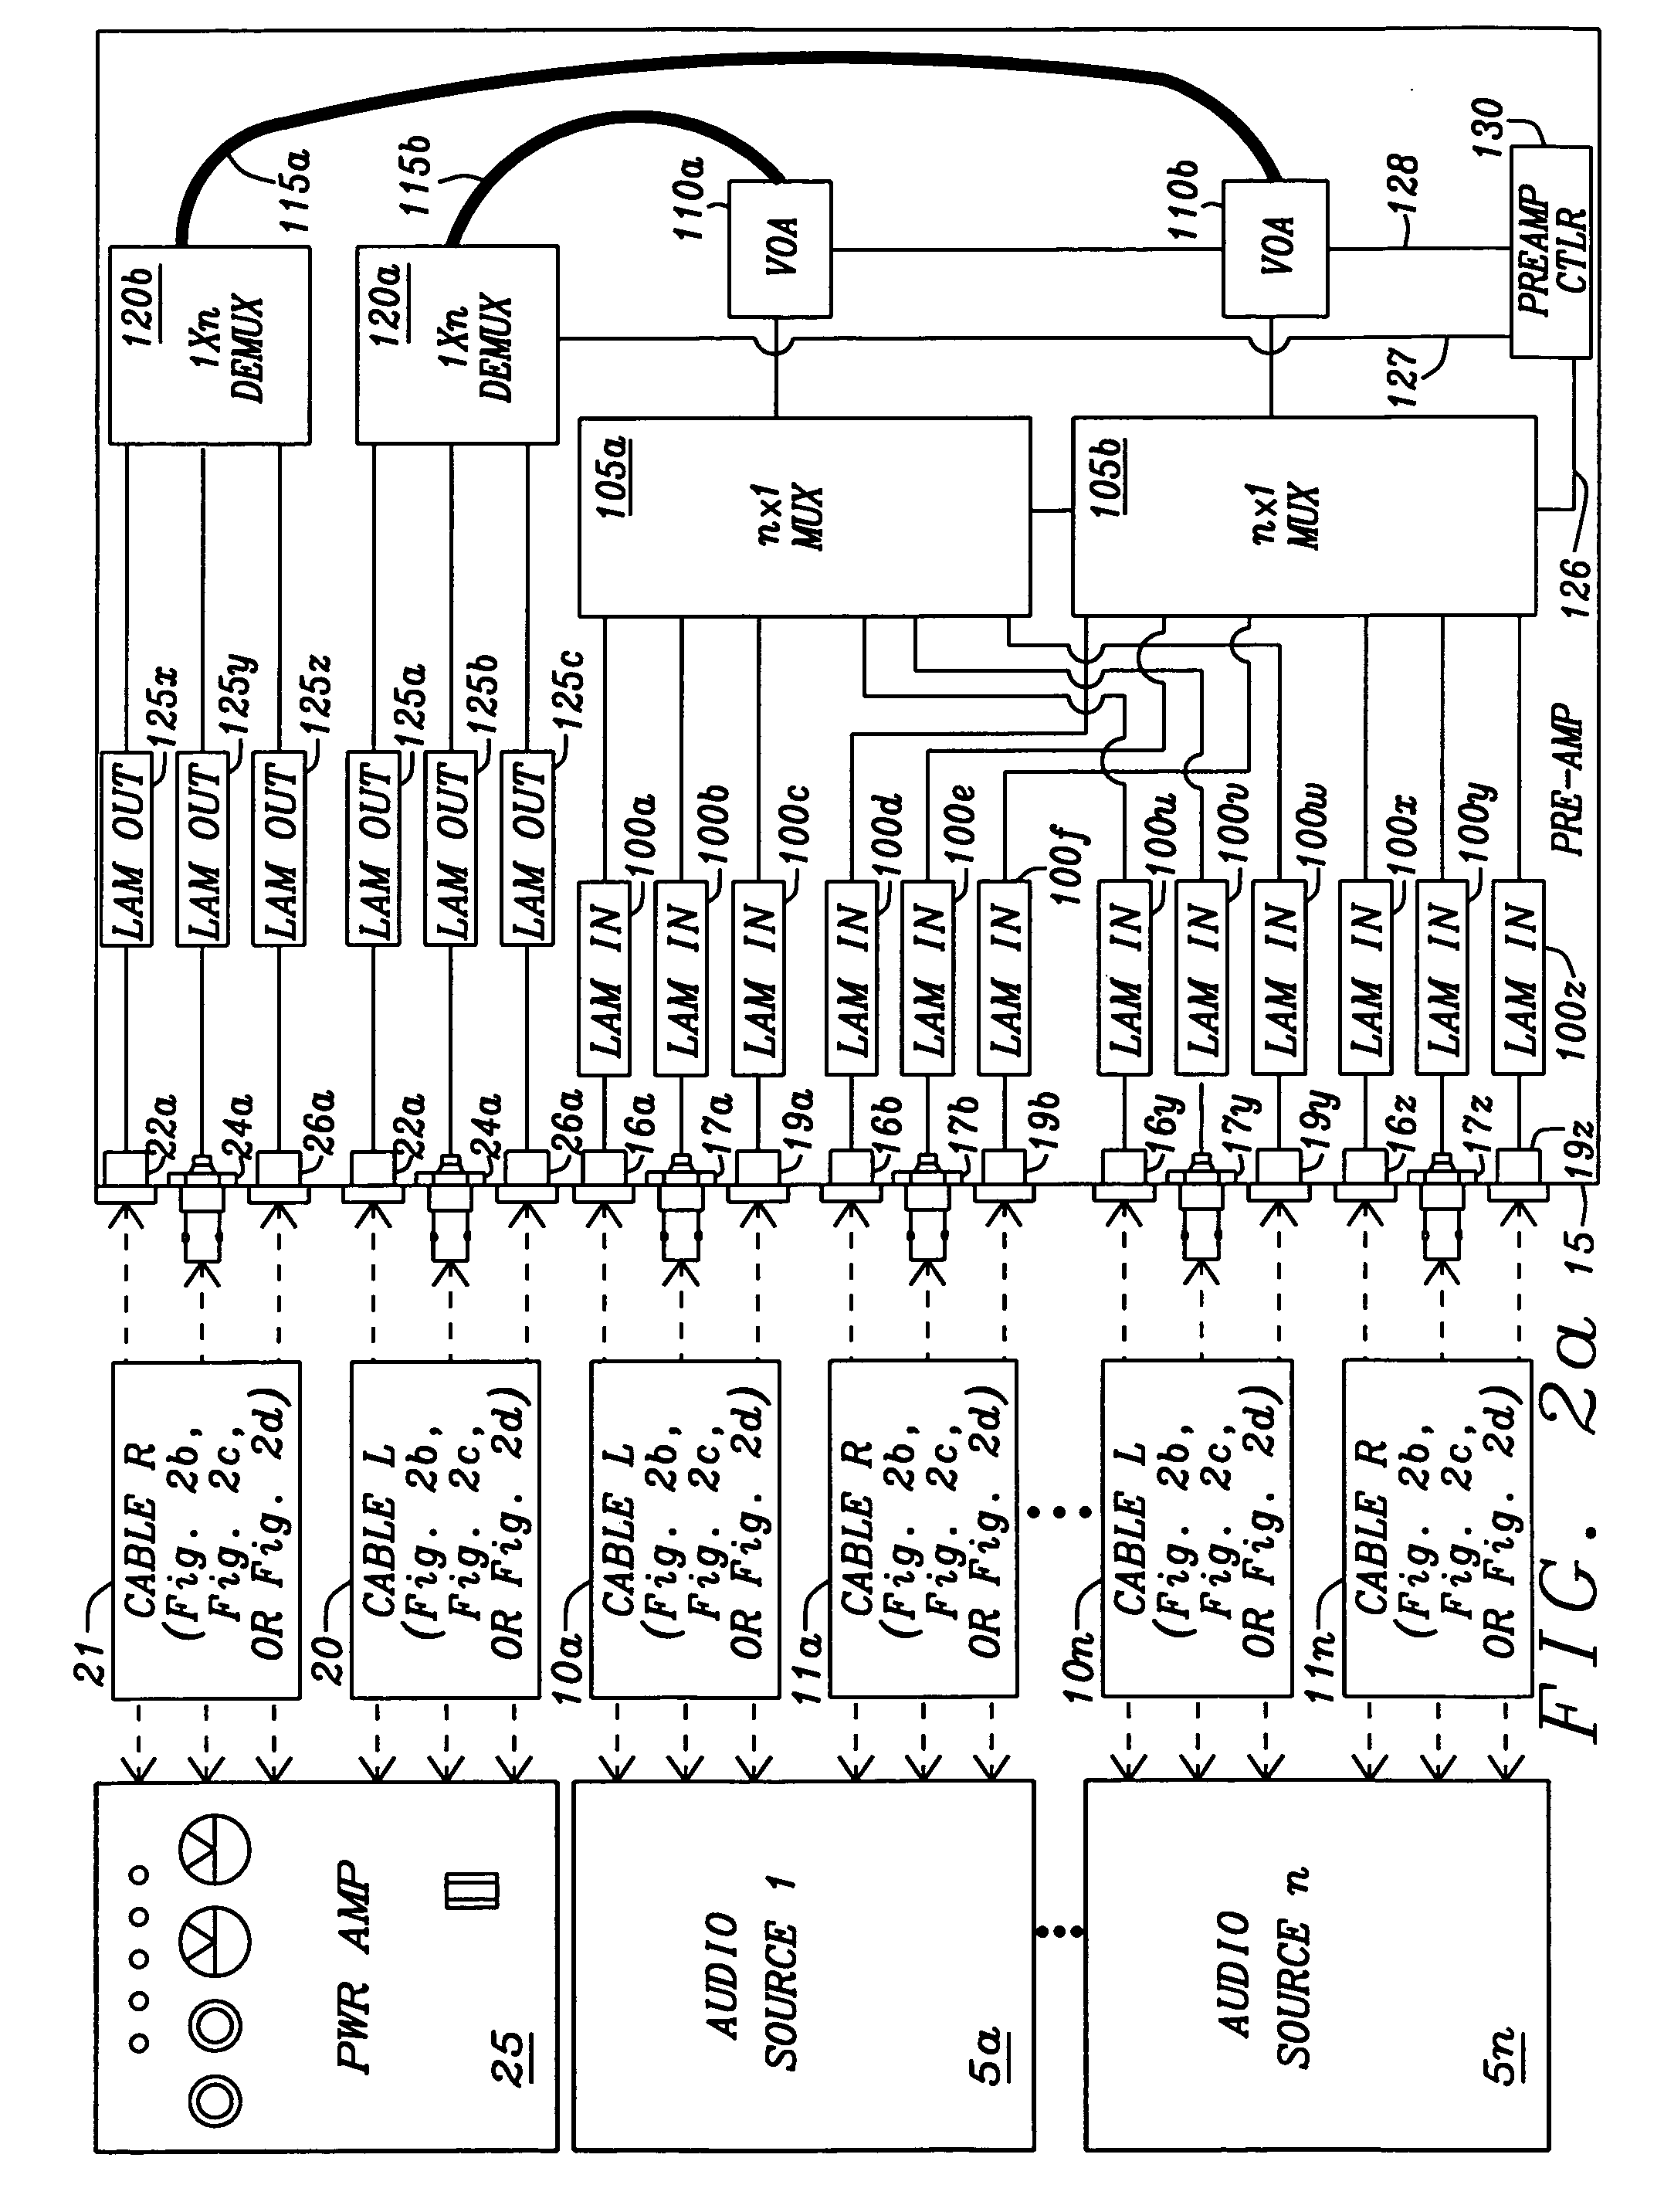 Laser audio preamplifier, volume control, and multiplexer